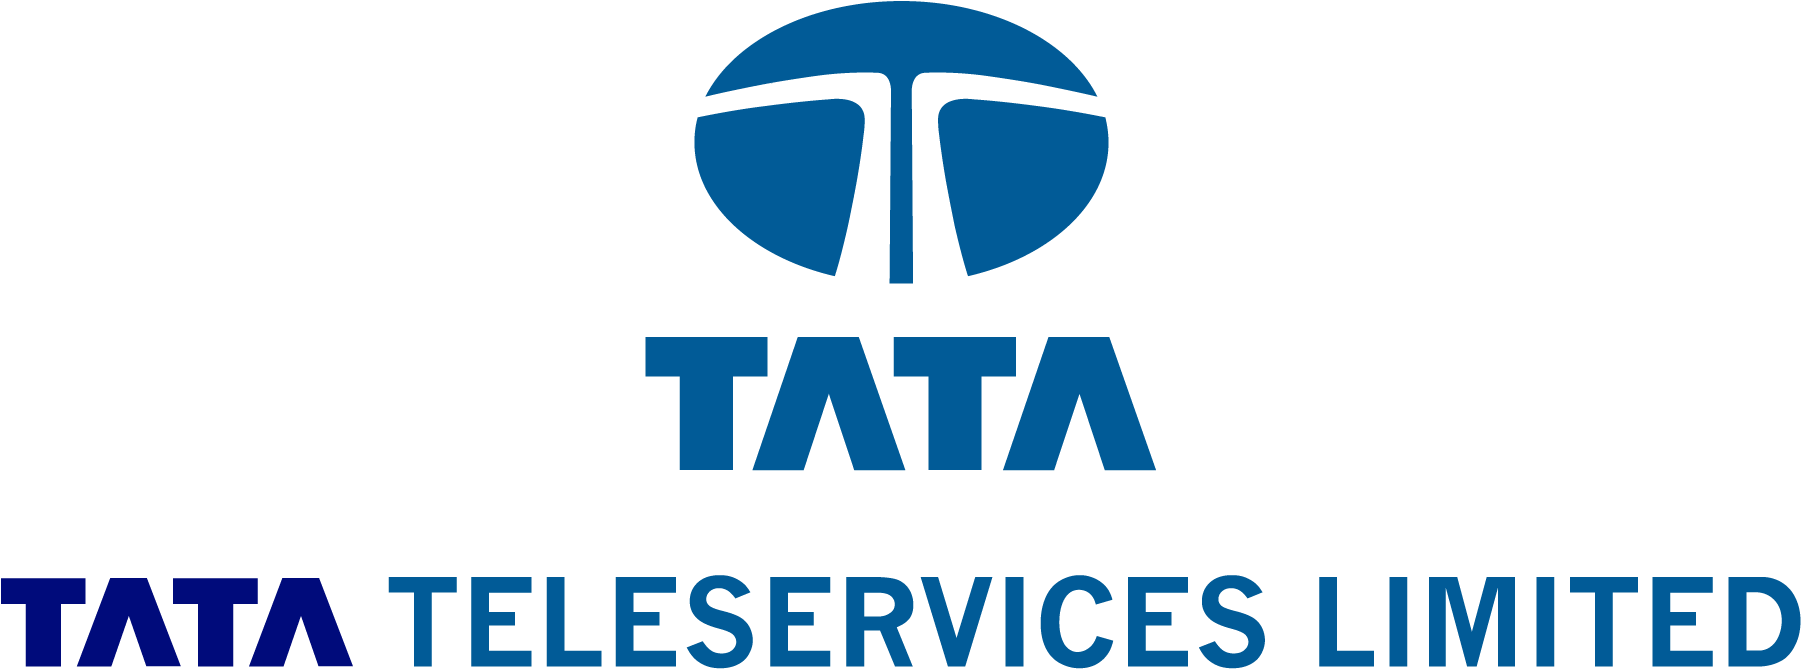 Tata Teleservices Limited Logo PNG image